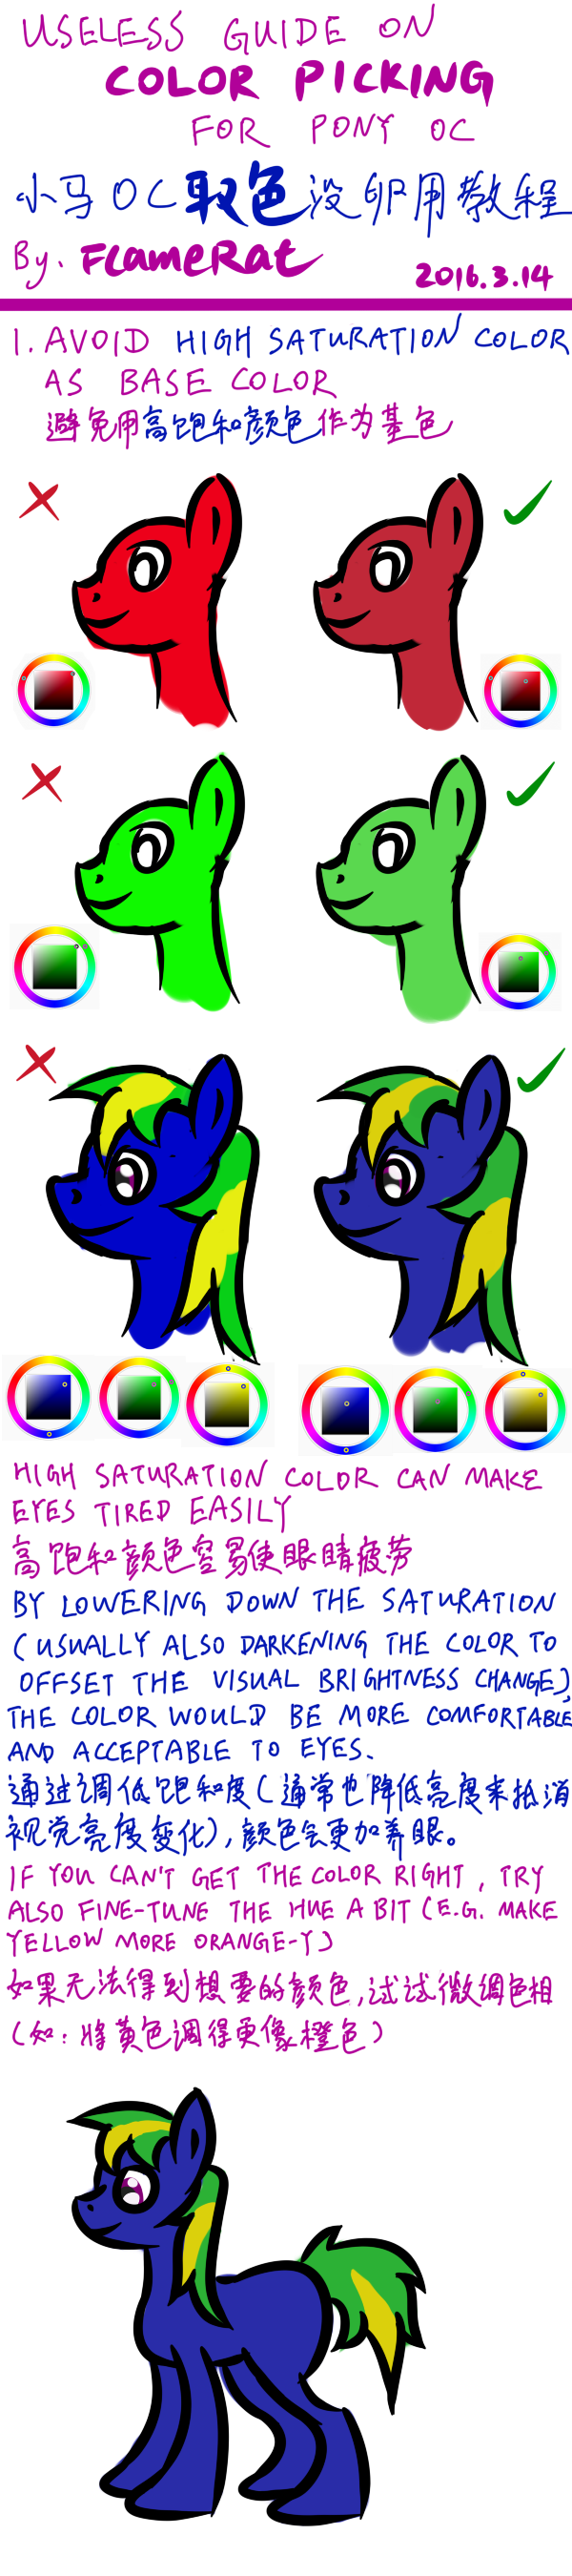 Useless guide on color picking for pony OC ( #1 )